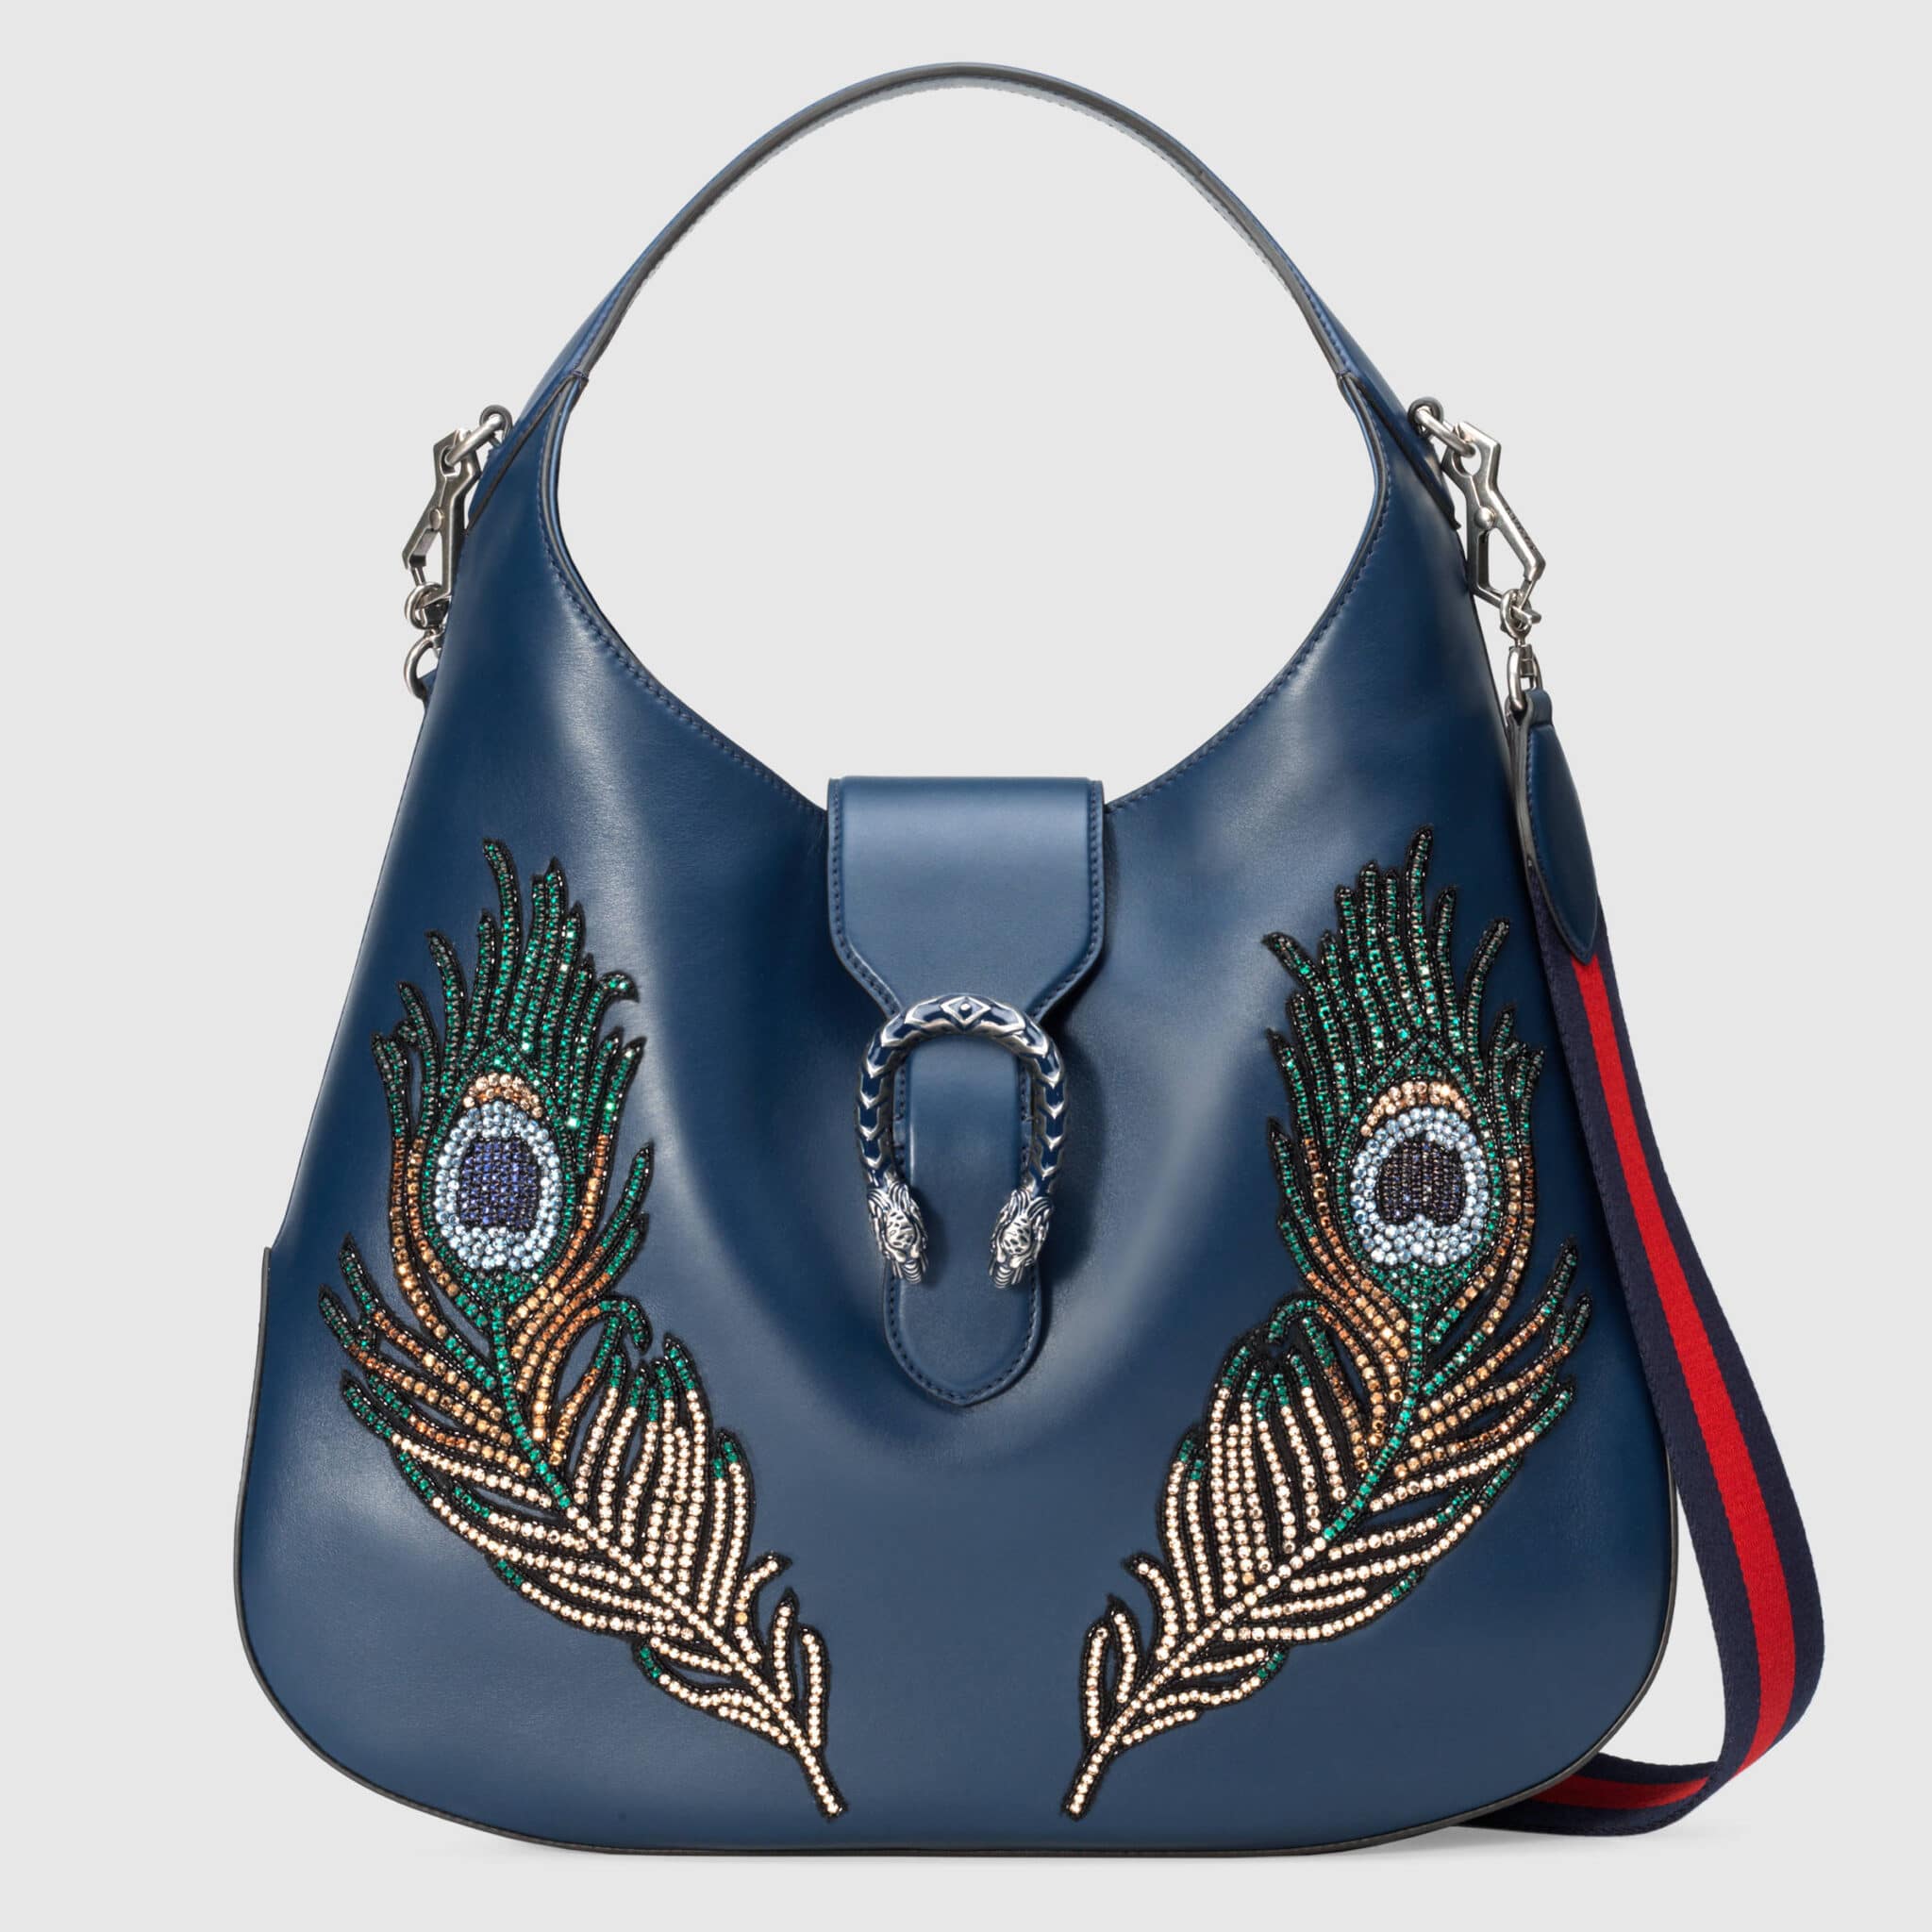 Gucci Gift Guide 2016 | Spotted Fashion